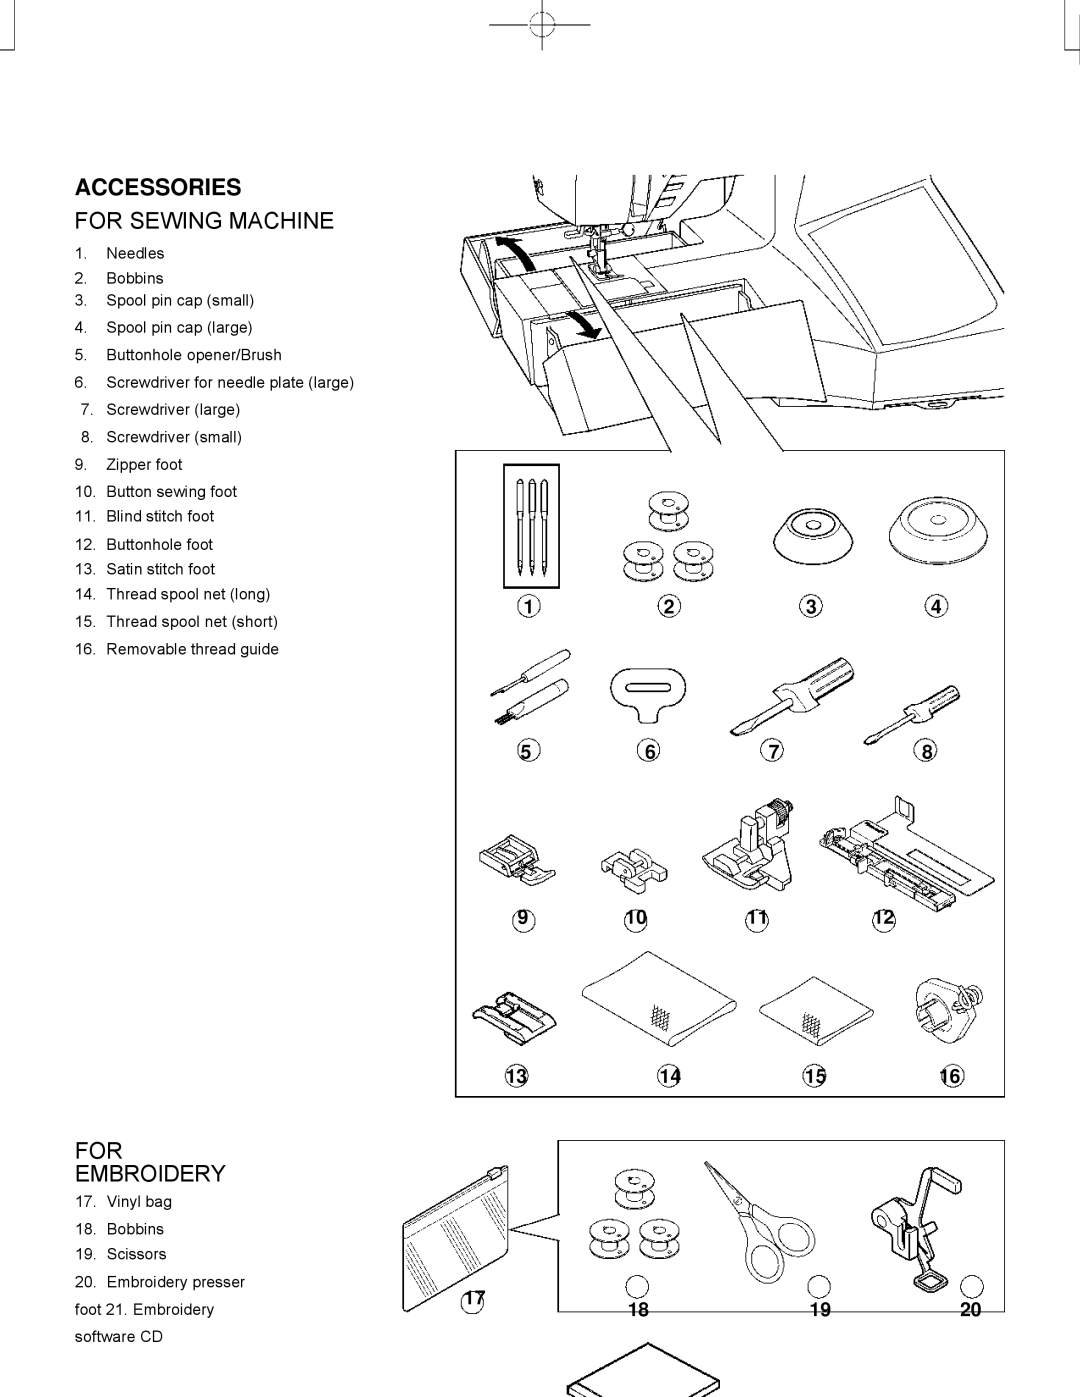 Singer CE-150 instruction manual Accessories, For Sewing Machine, For Embroidery 